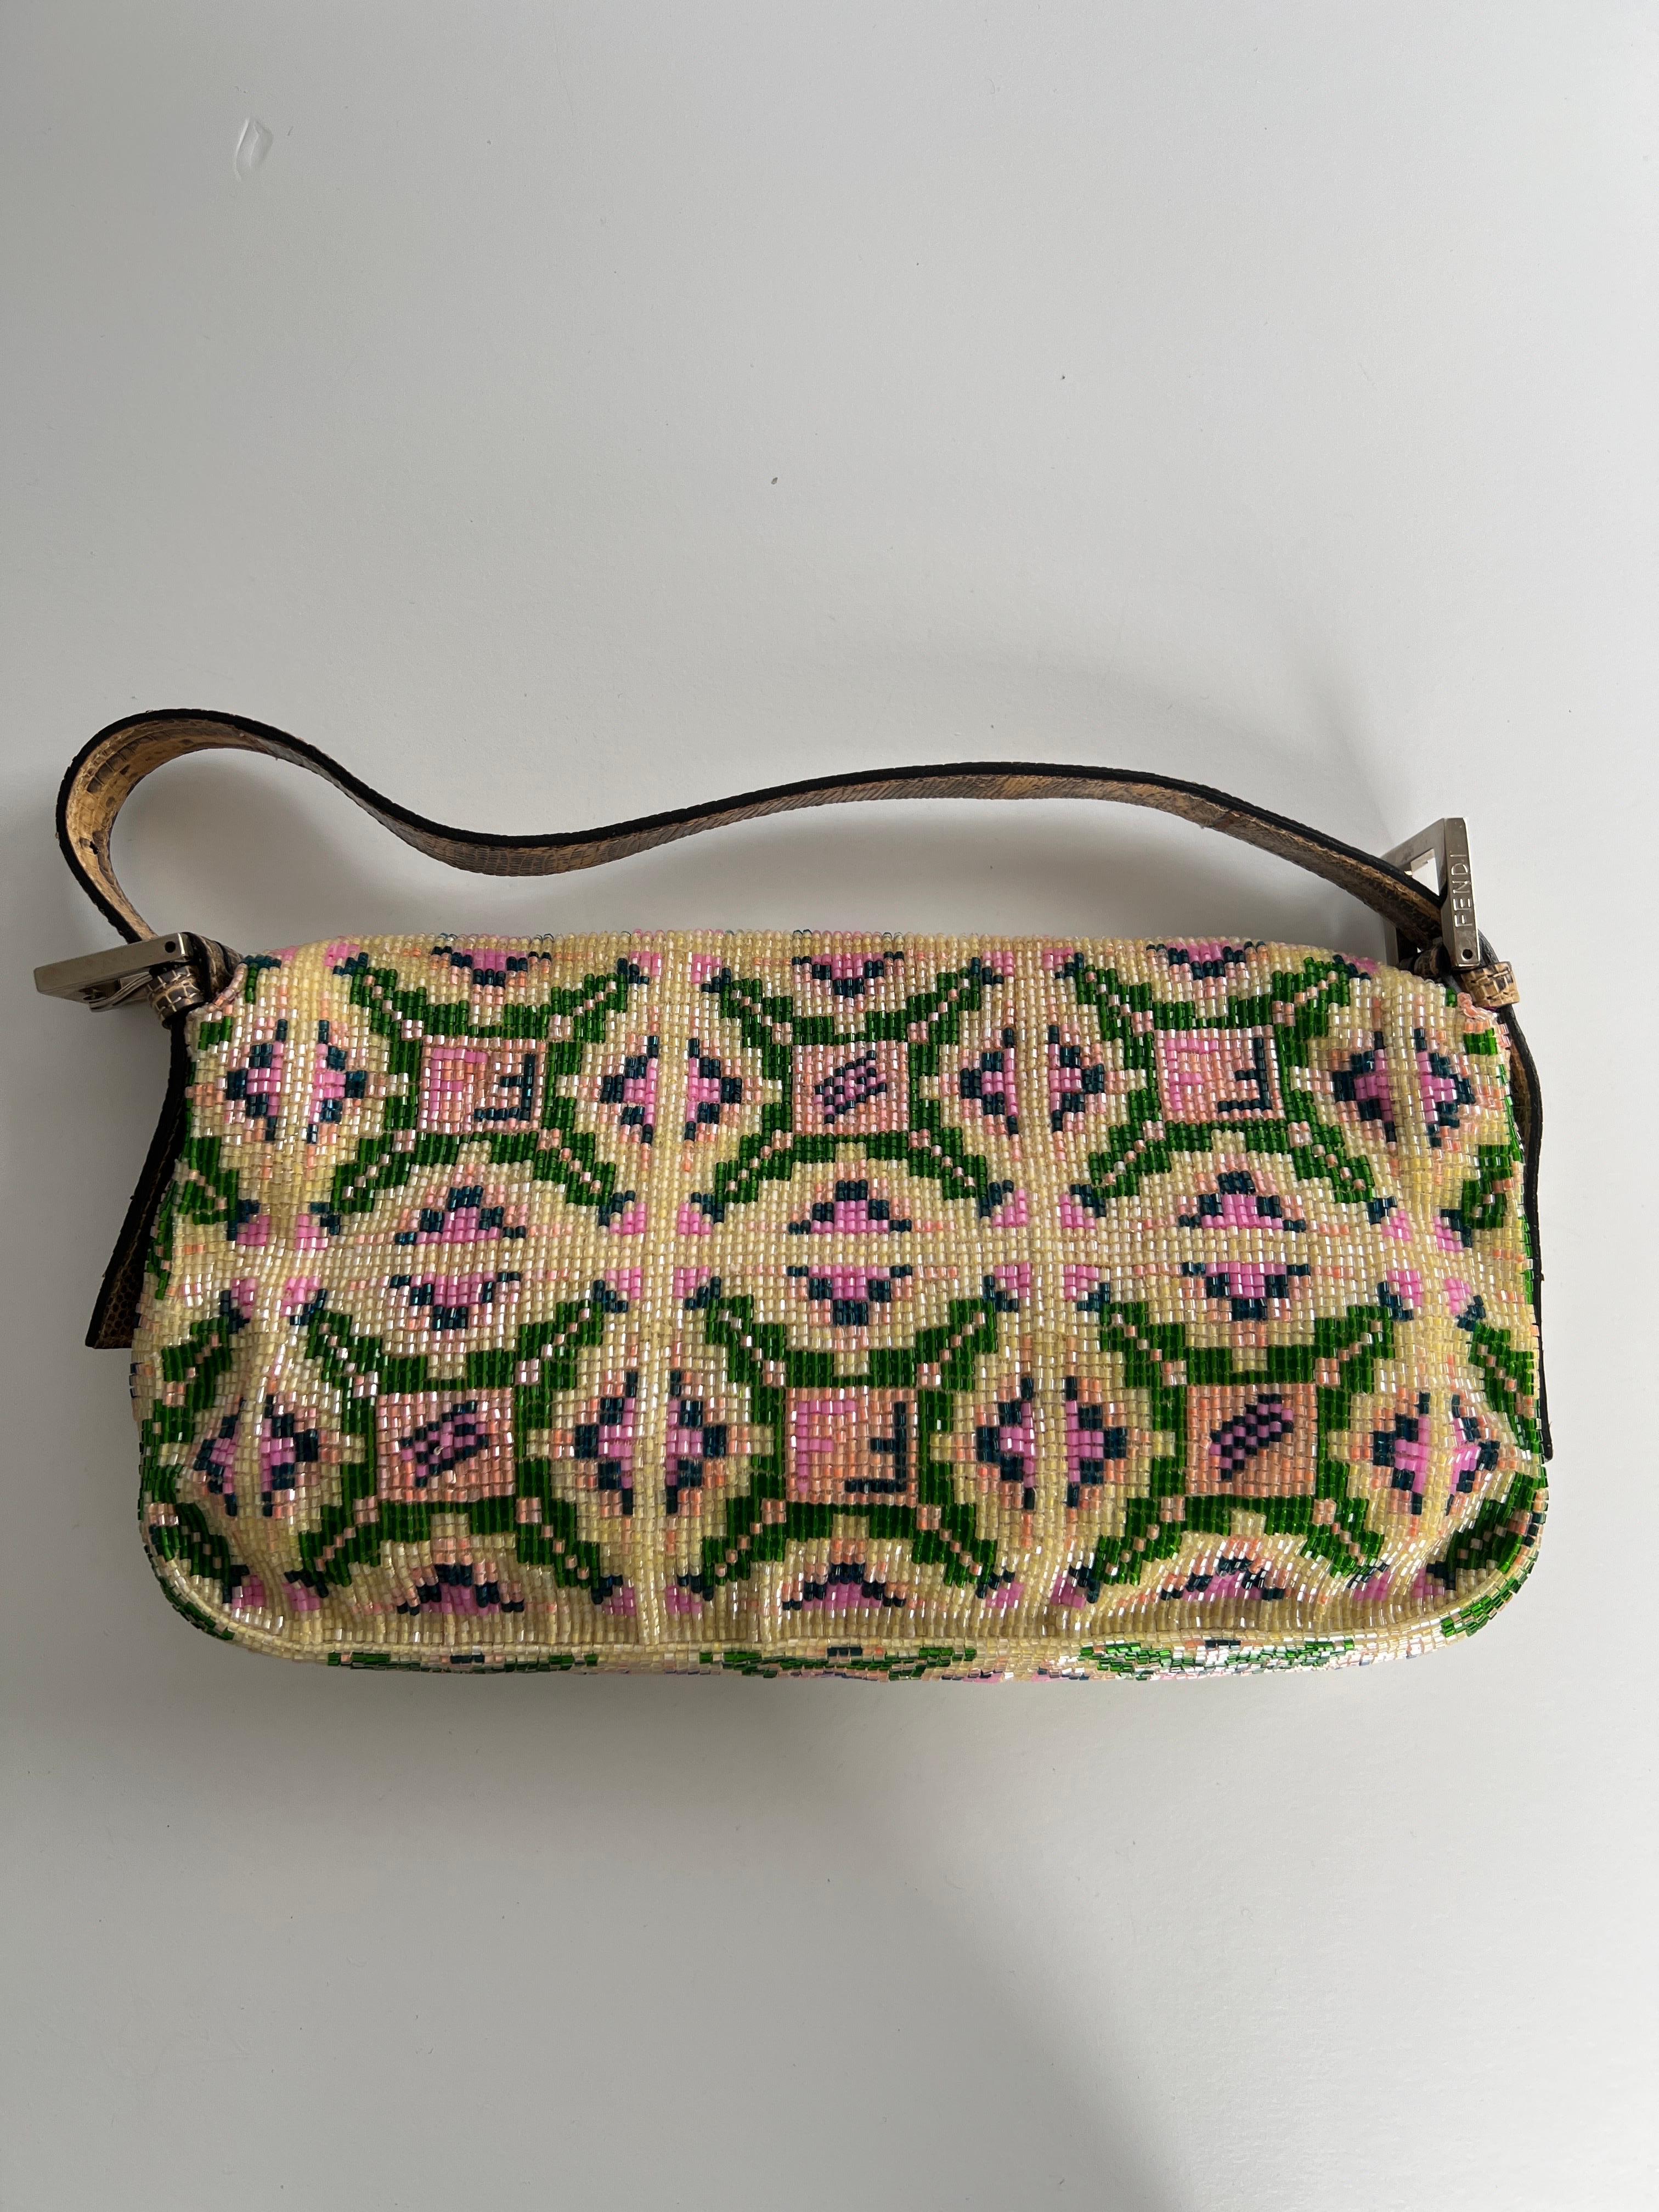 Fendi pink and green beaded baguette In Excellent Condition For Sale In Aurora, IL